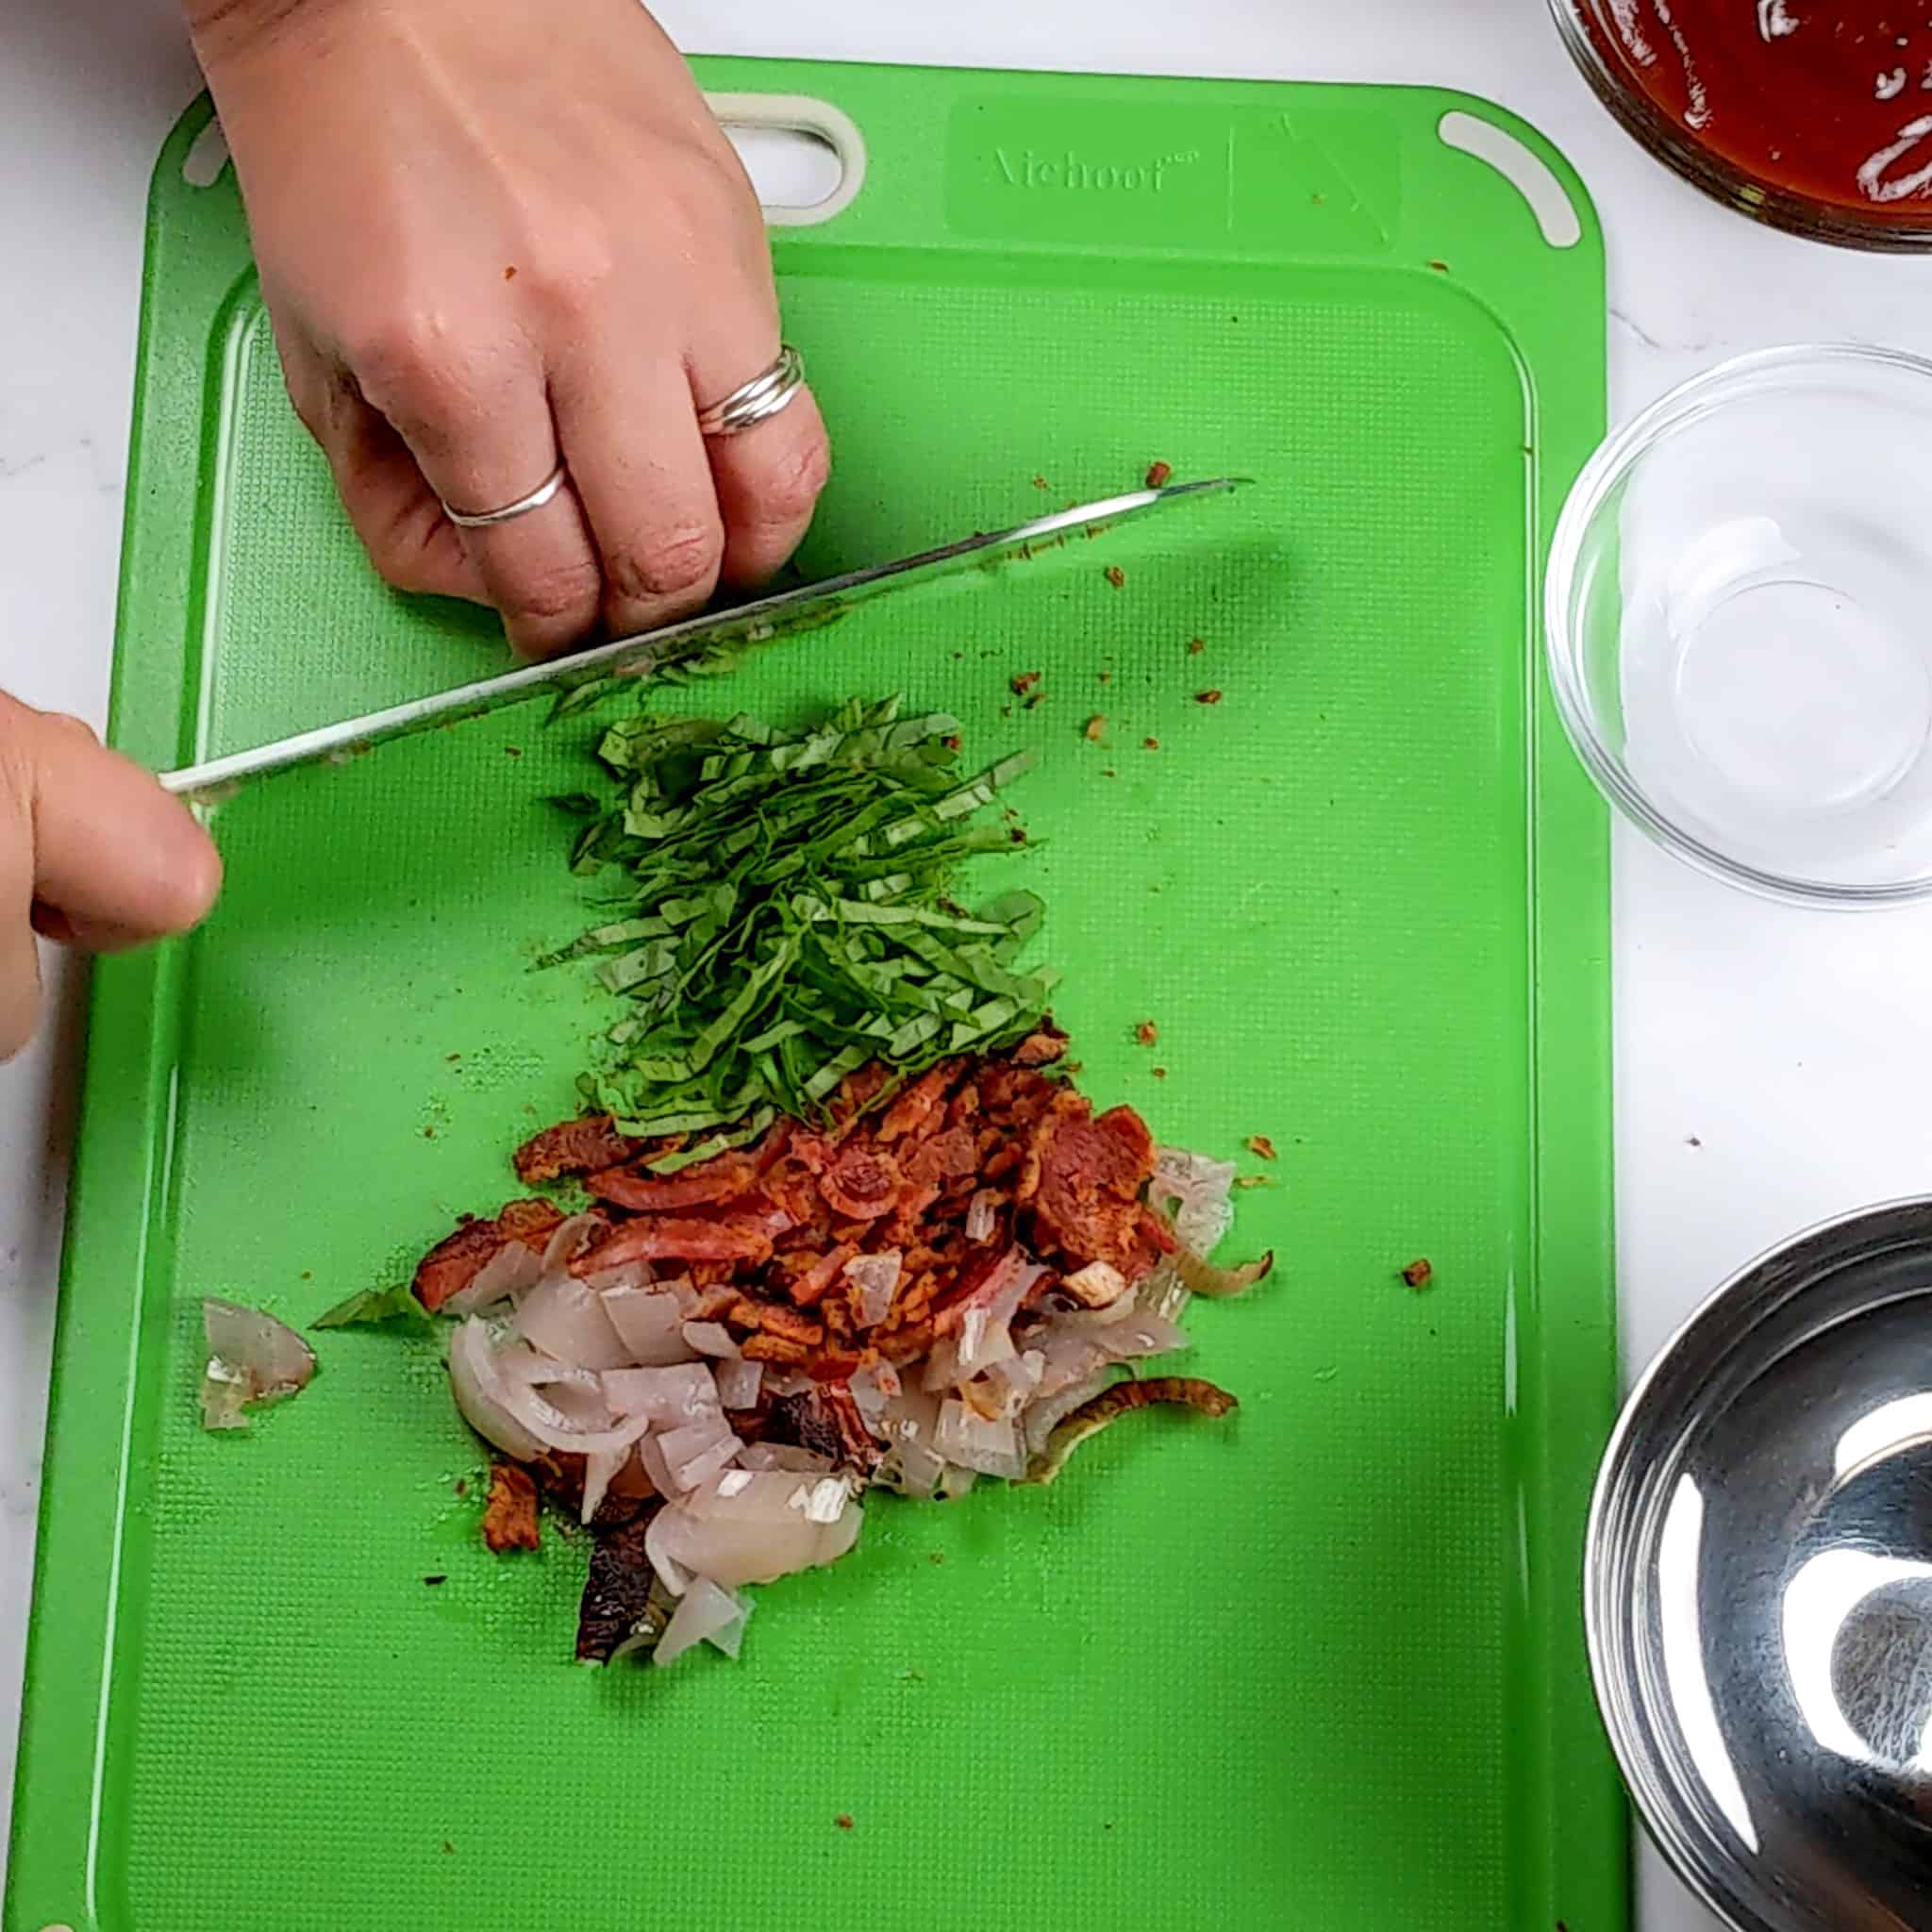 Basil being chopped next to chopped bacon and roasted shallots on a cutting board for the Easy Baked Cheesy Crispy Barbeque Chicken Cutlets recipe.